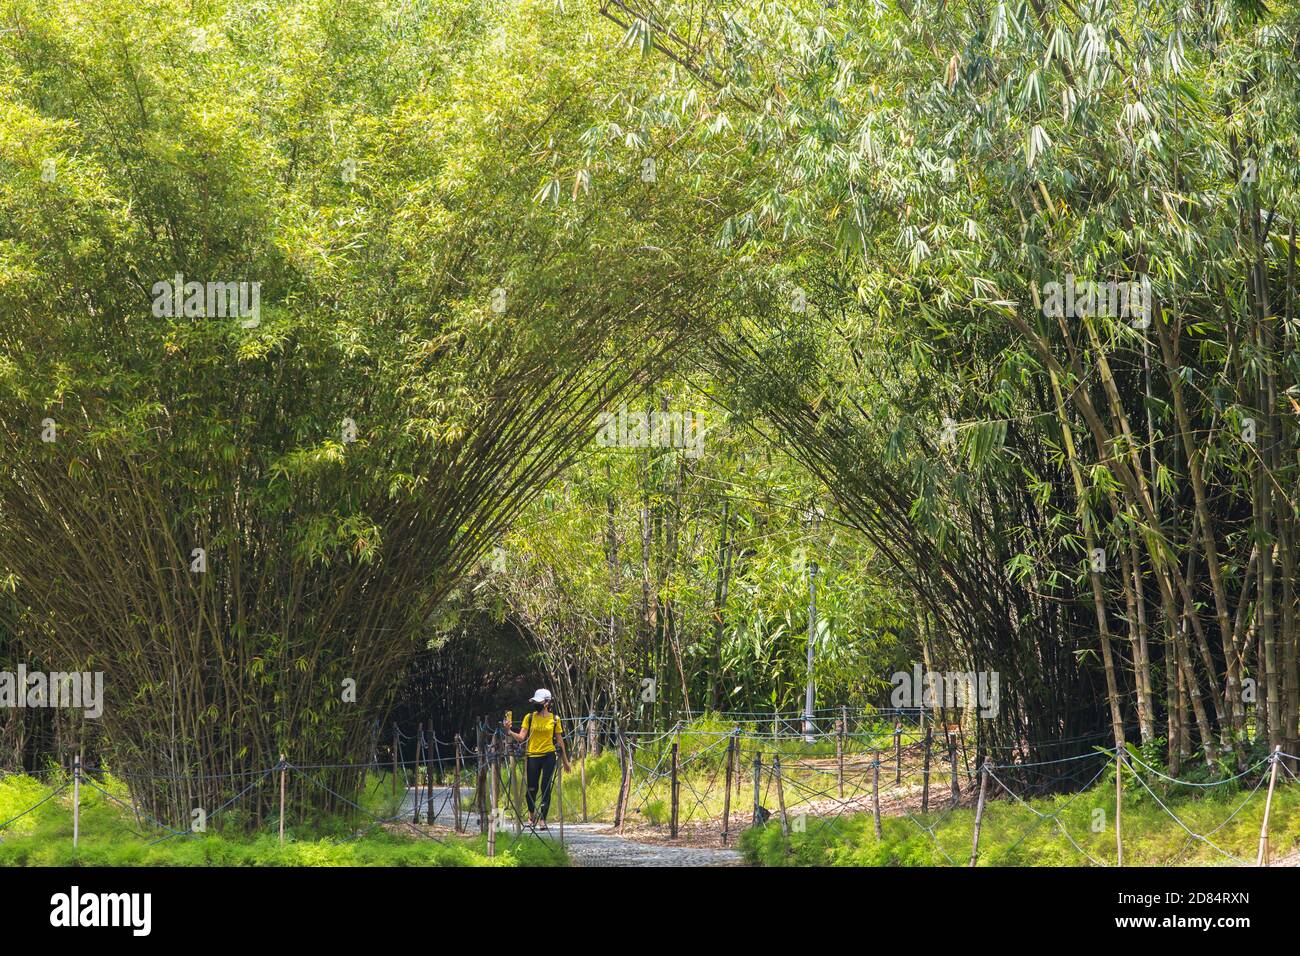 A woman in white cap and yellow tree is using her phone to film the scenery during her walk through the lush canopy of trees. Singapore. Stock Photo